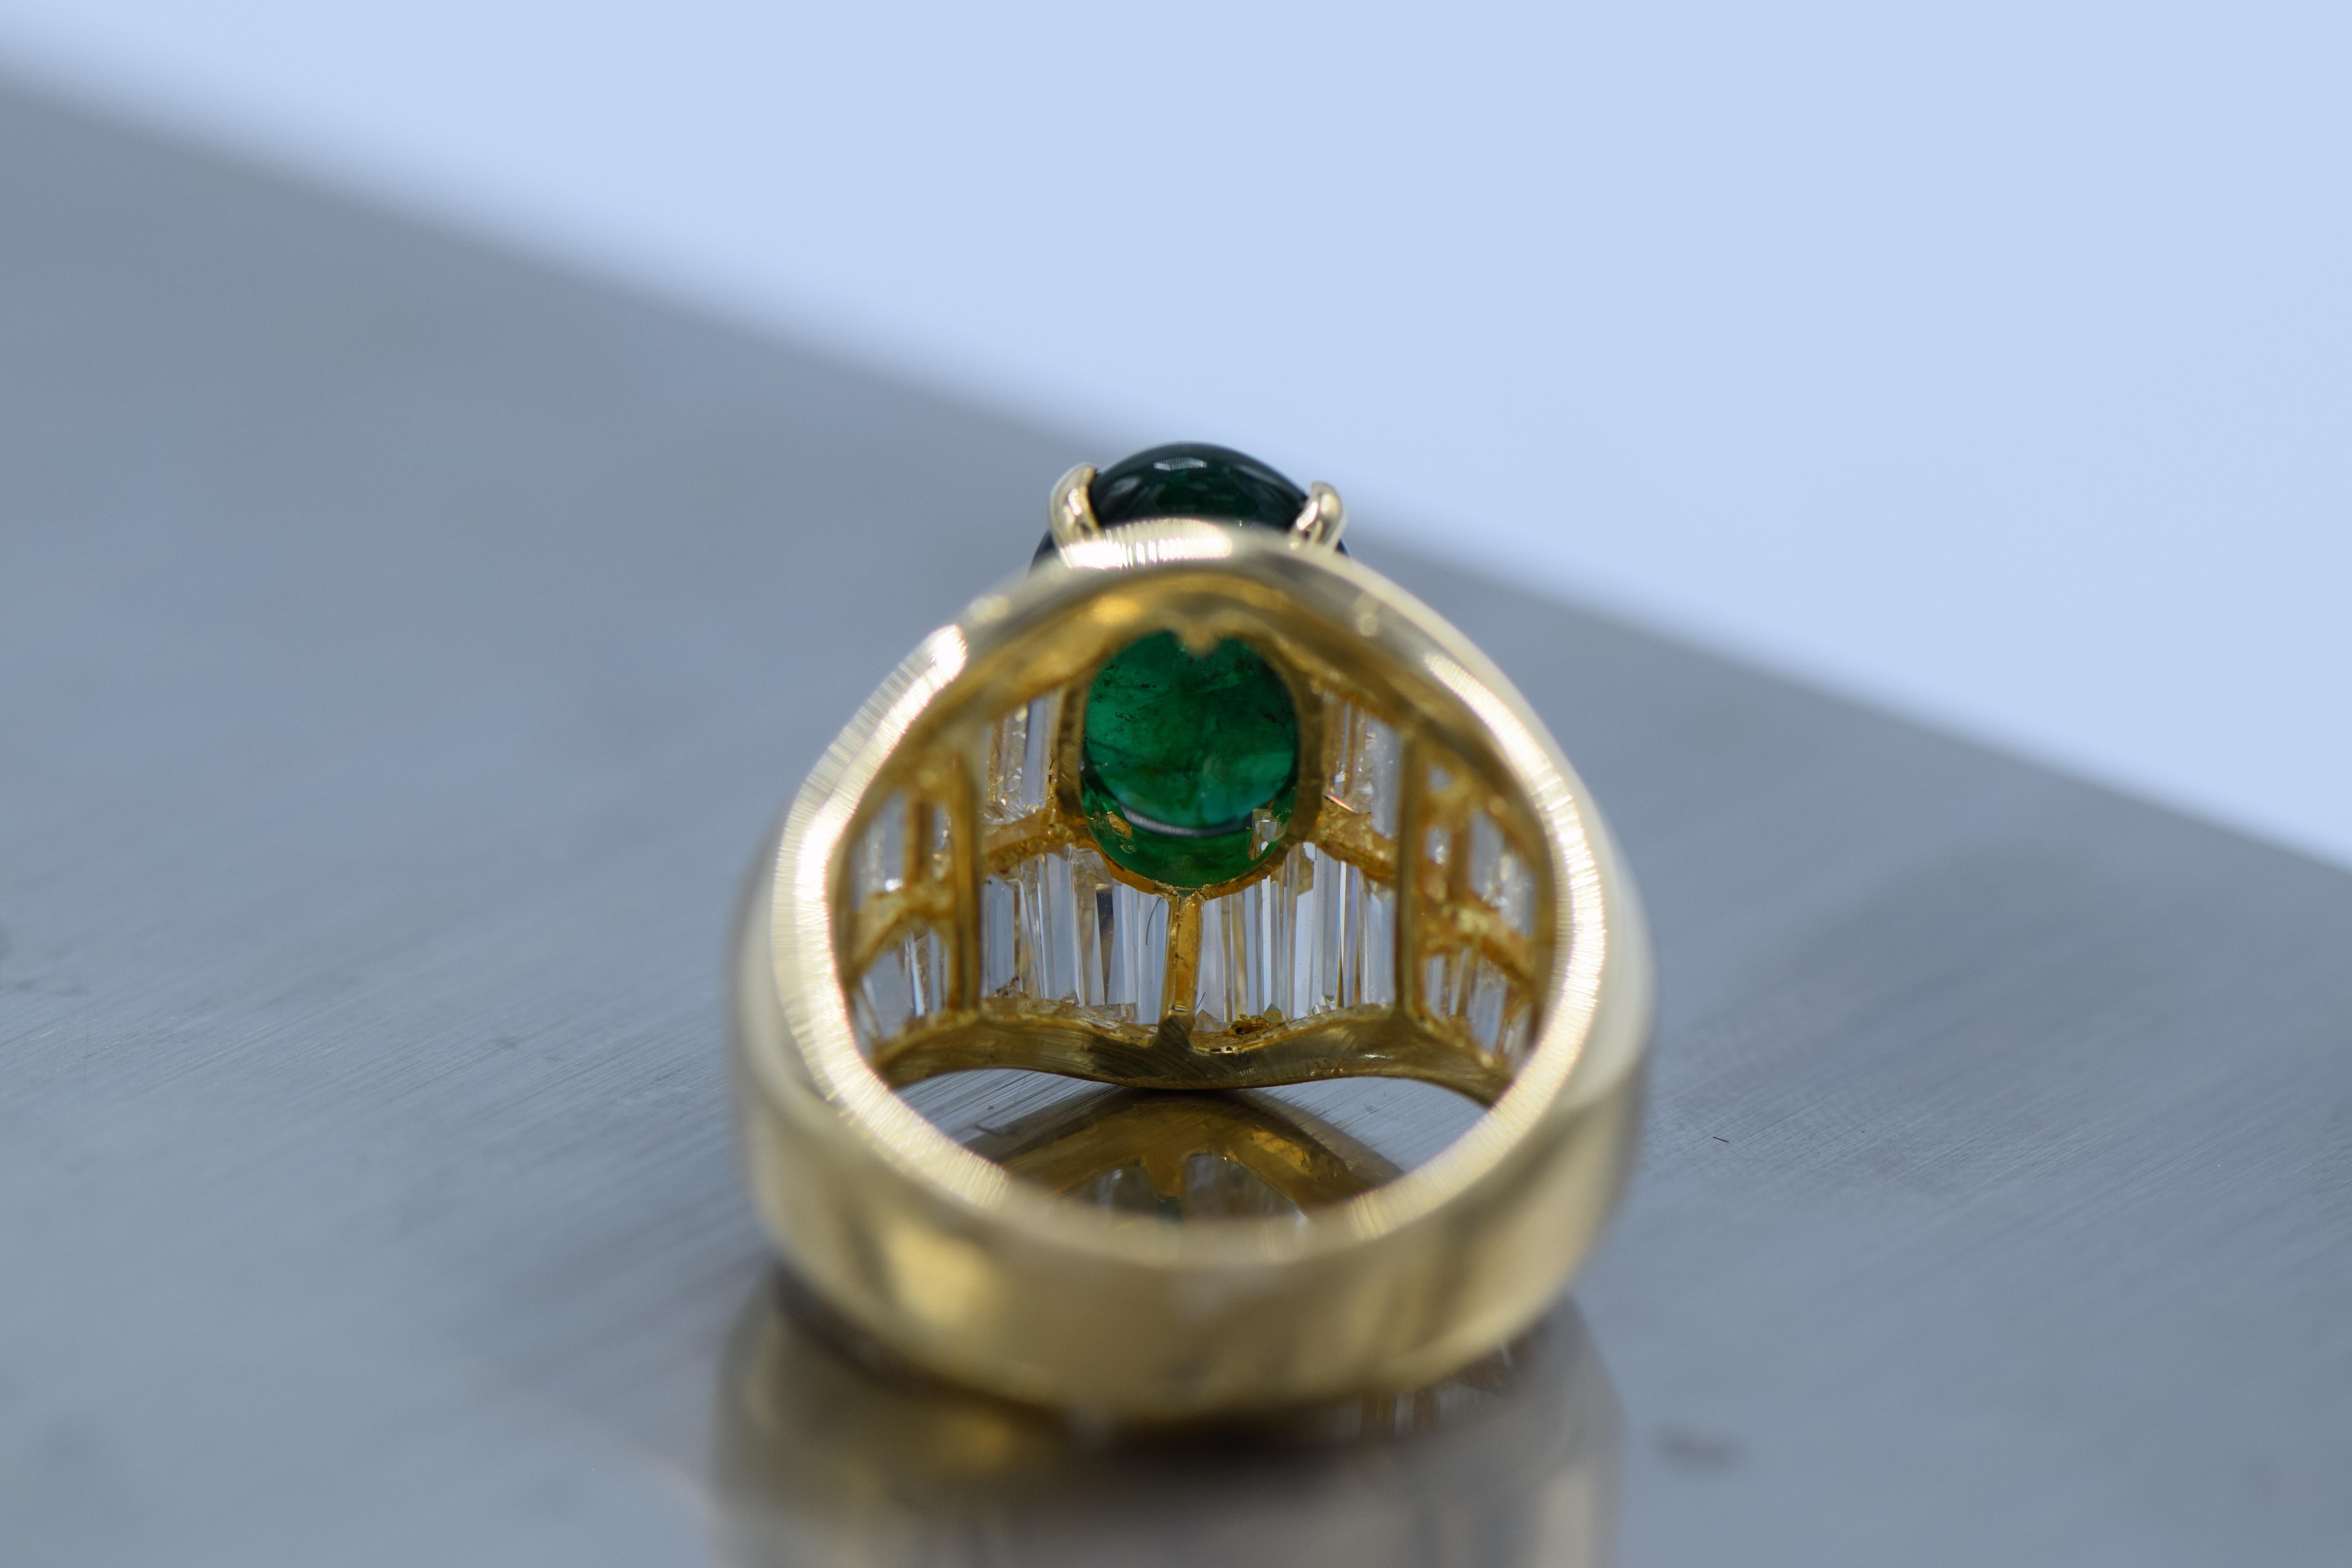 18 kt., one oval cabochon emerald ap. 2.85 cts.

40 baguette & tapered baguette diamonds ap. 2.45 cts., ap. 6.8 dwts.

Size 5 3/4. 

Cabochon emerald: deep green, good color saturation, moderately included, translucent, good polish. 

Color: